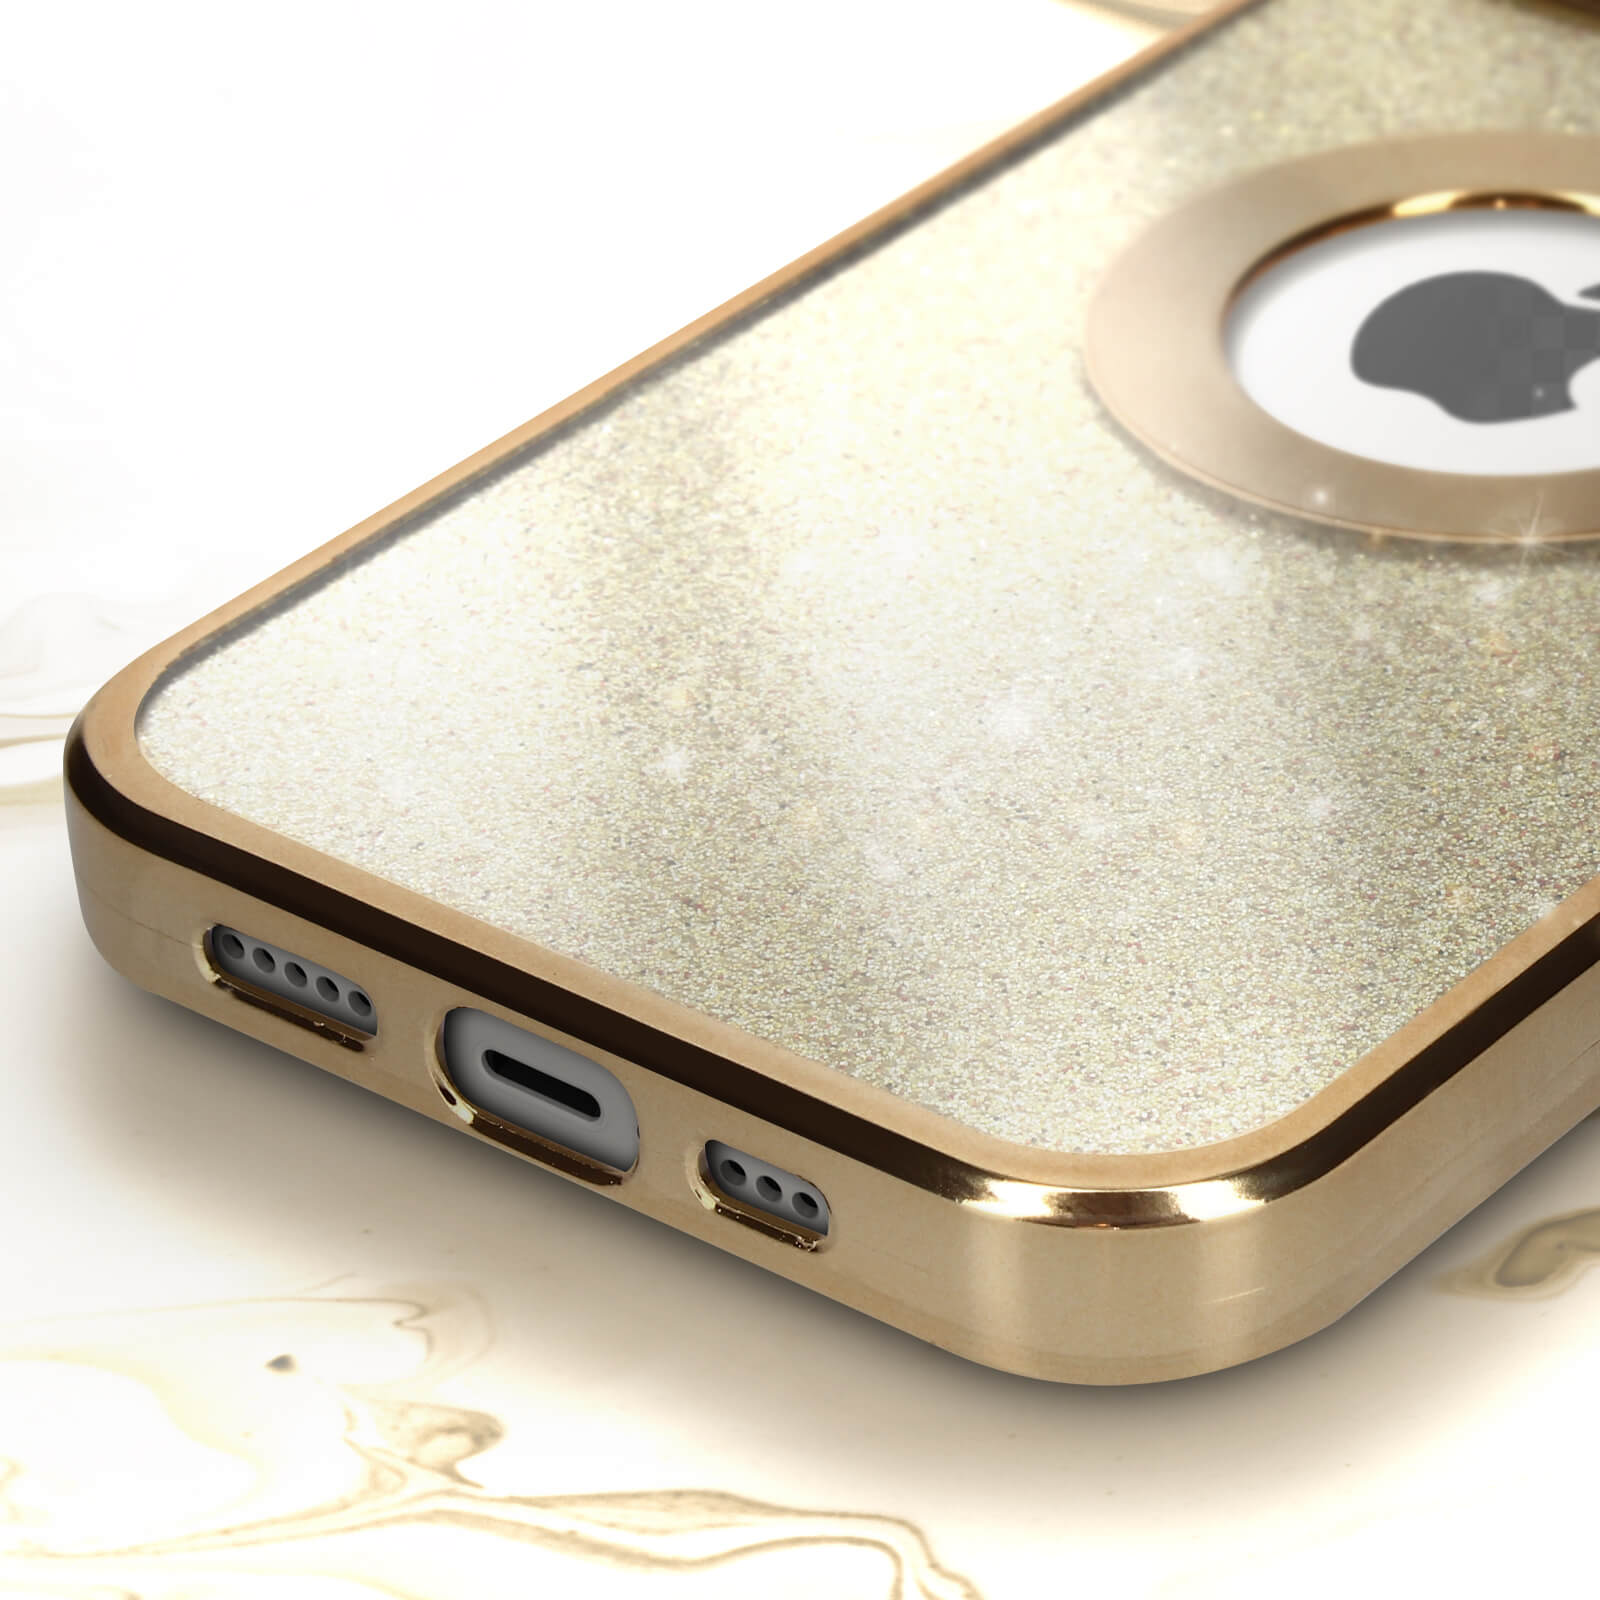 13 Spark Gold Pro, Protecam AVIZAR Apple, Backcover, iPhone Series,